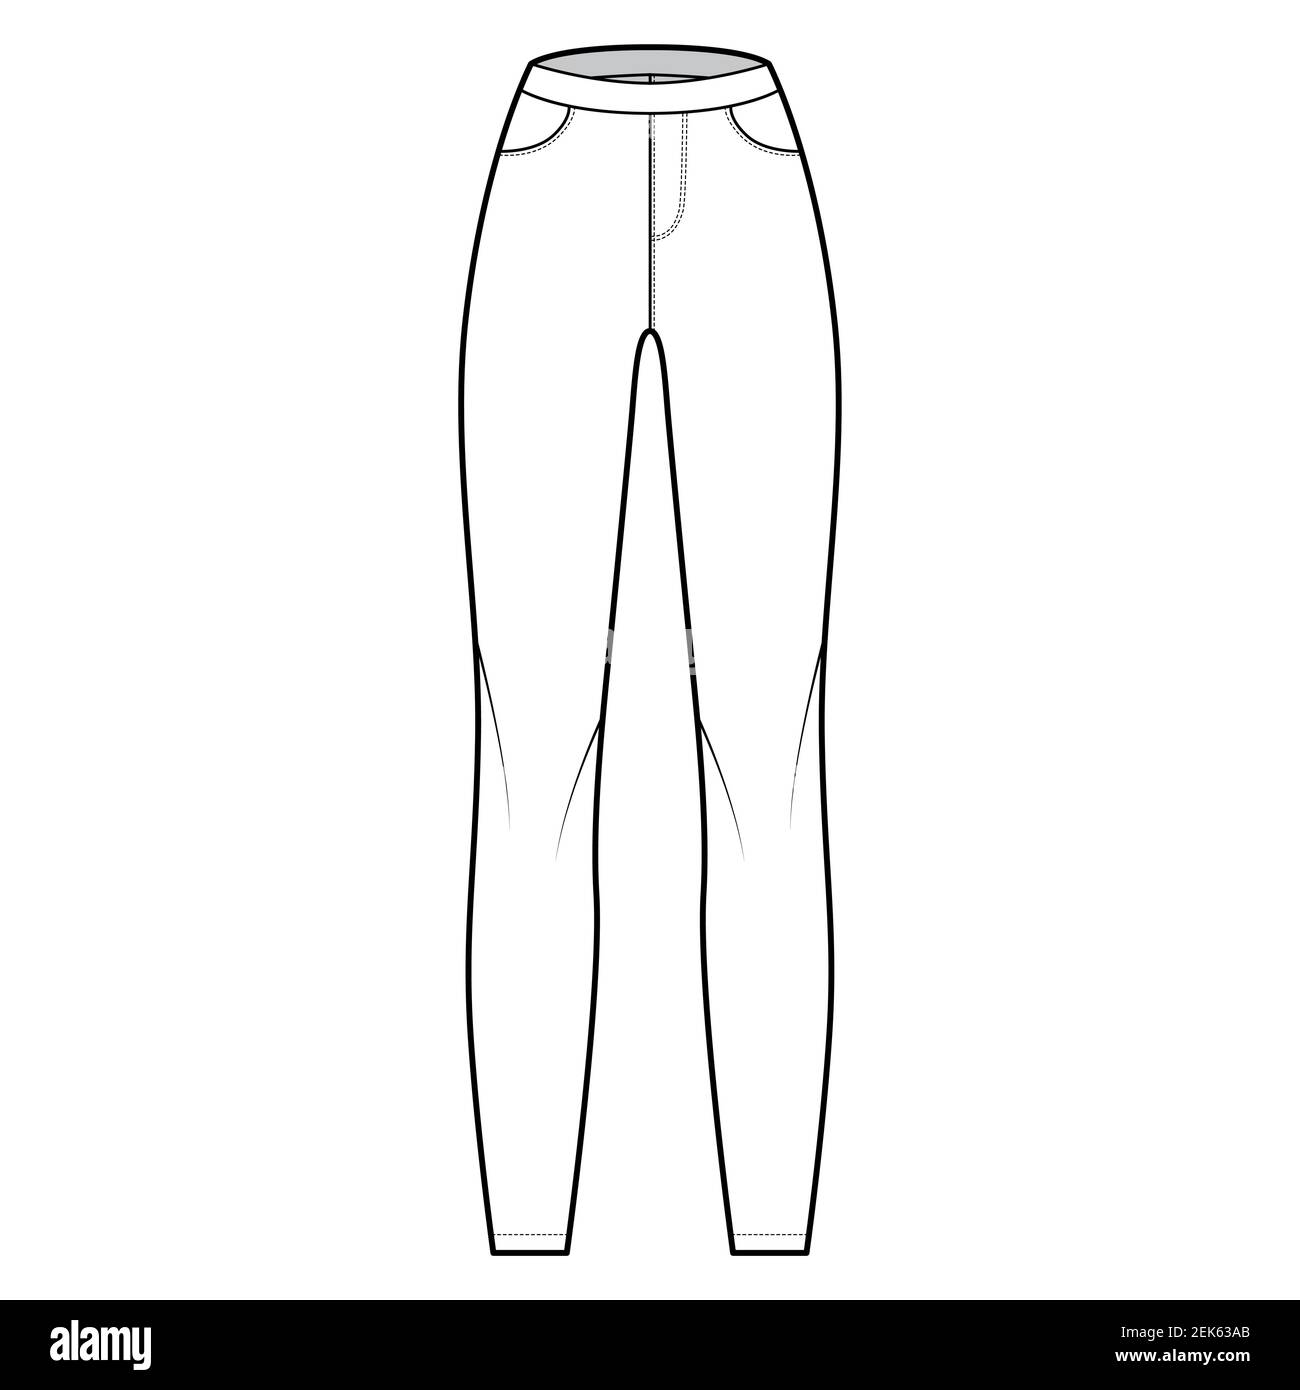 Jeggings technical fashion illustration with normal waist, high rise ...